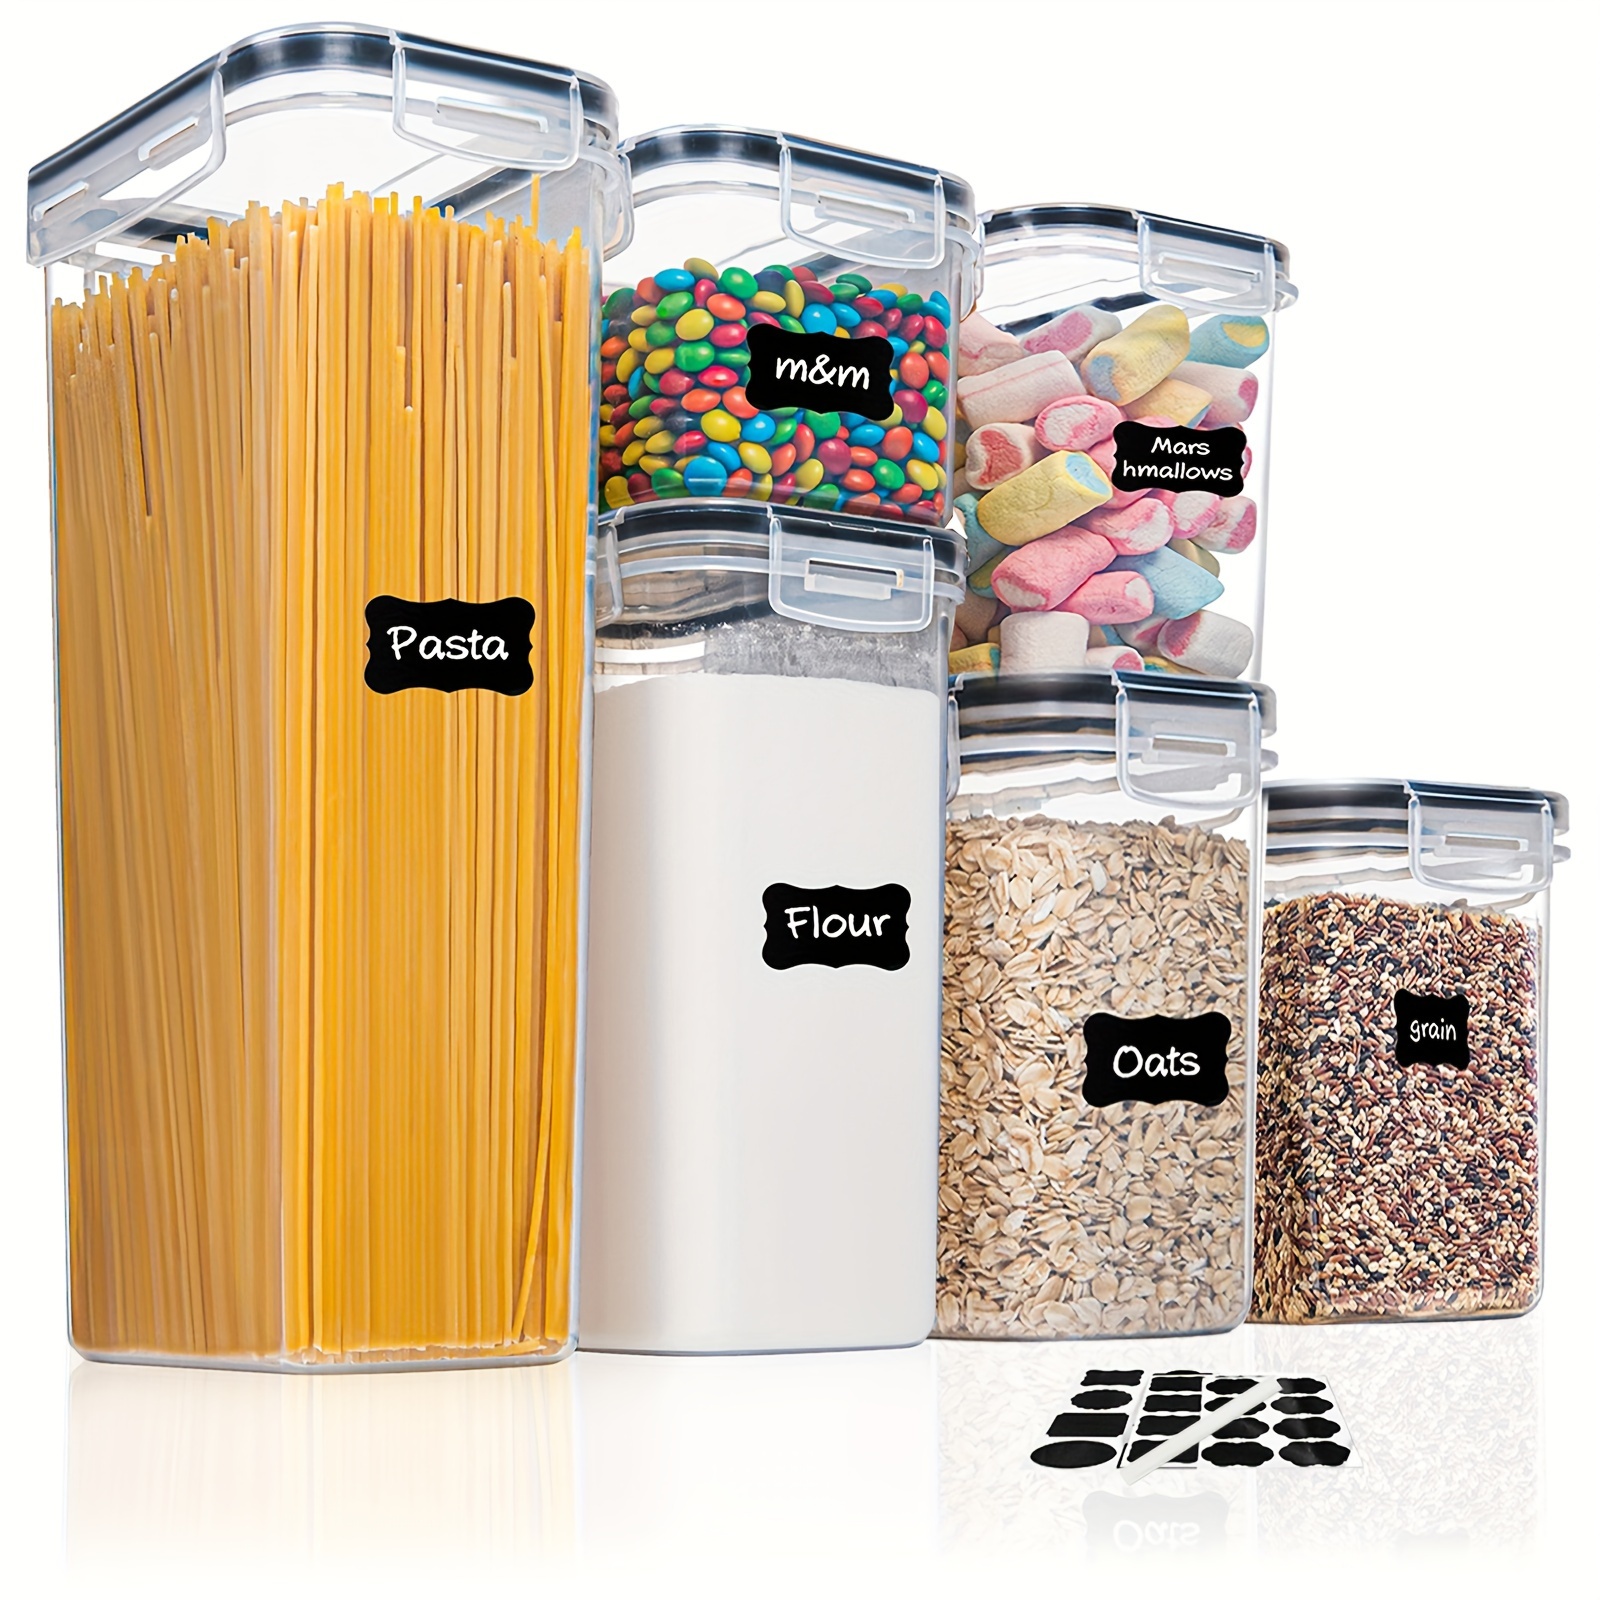 Vtopmart Cereal Storage Container Set, BPA Free Plastic Airtight Food